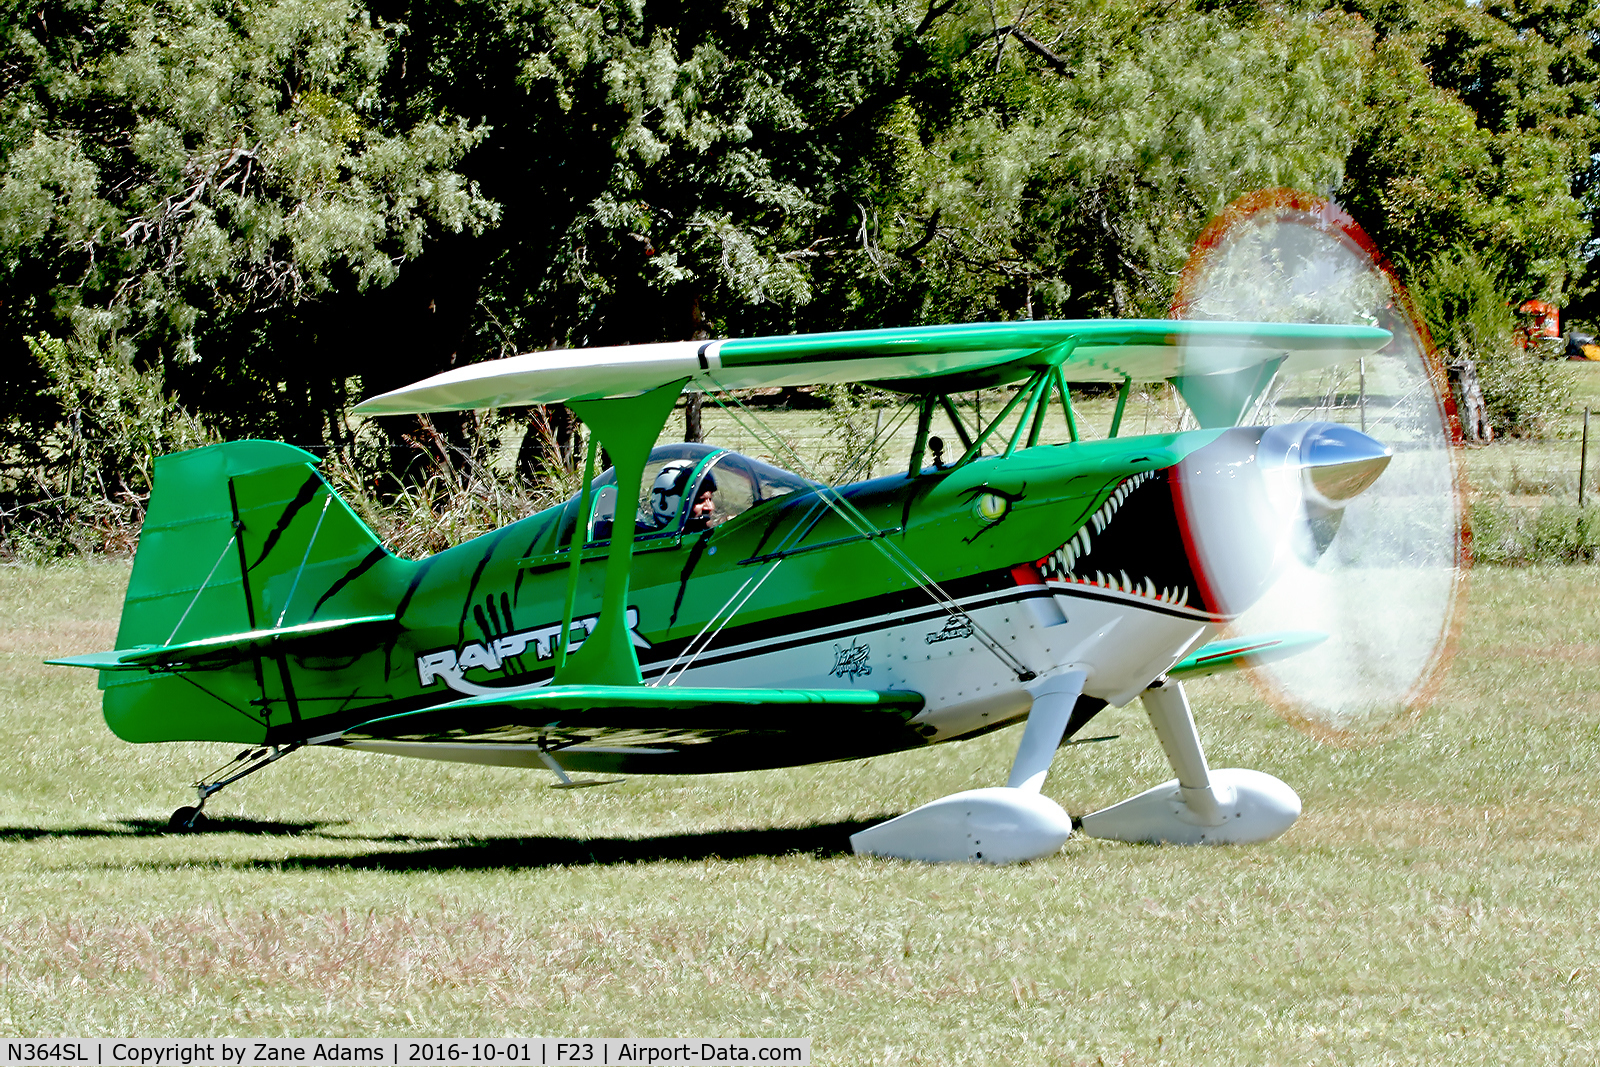 N364SL, 1980 Aerotek Pitts S-2S Special C/N 1011, At the 2016 Ranger, Texas Fly-in